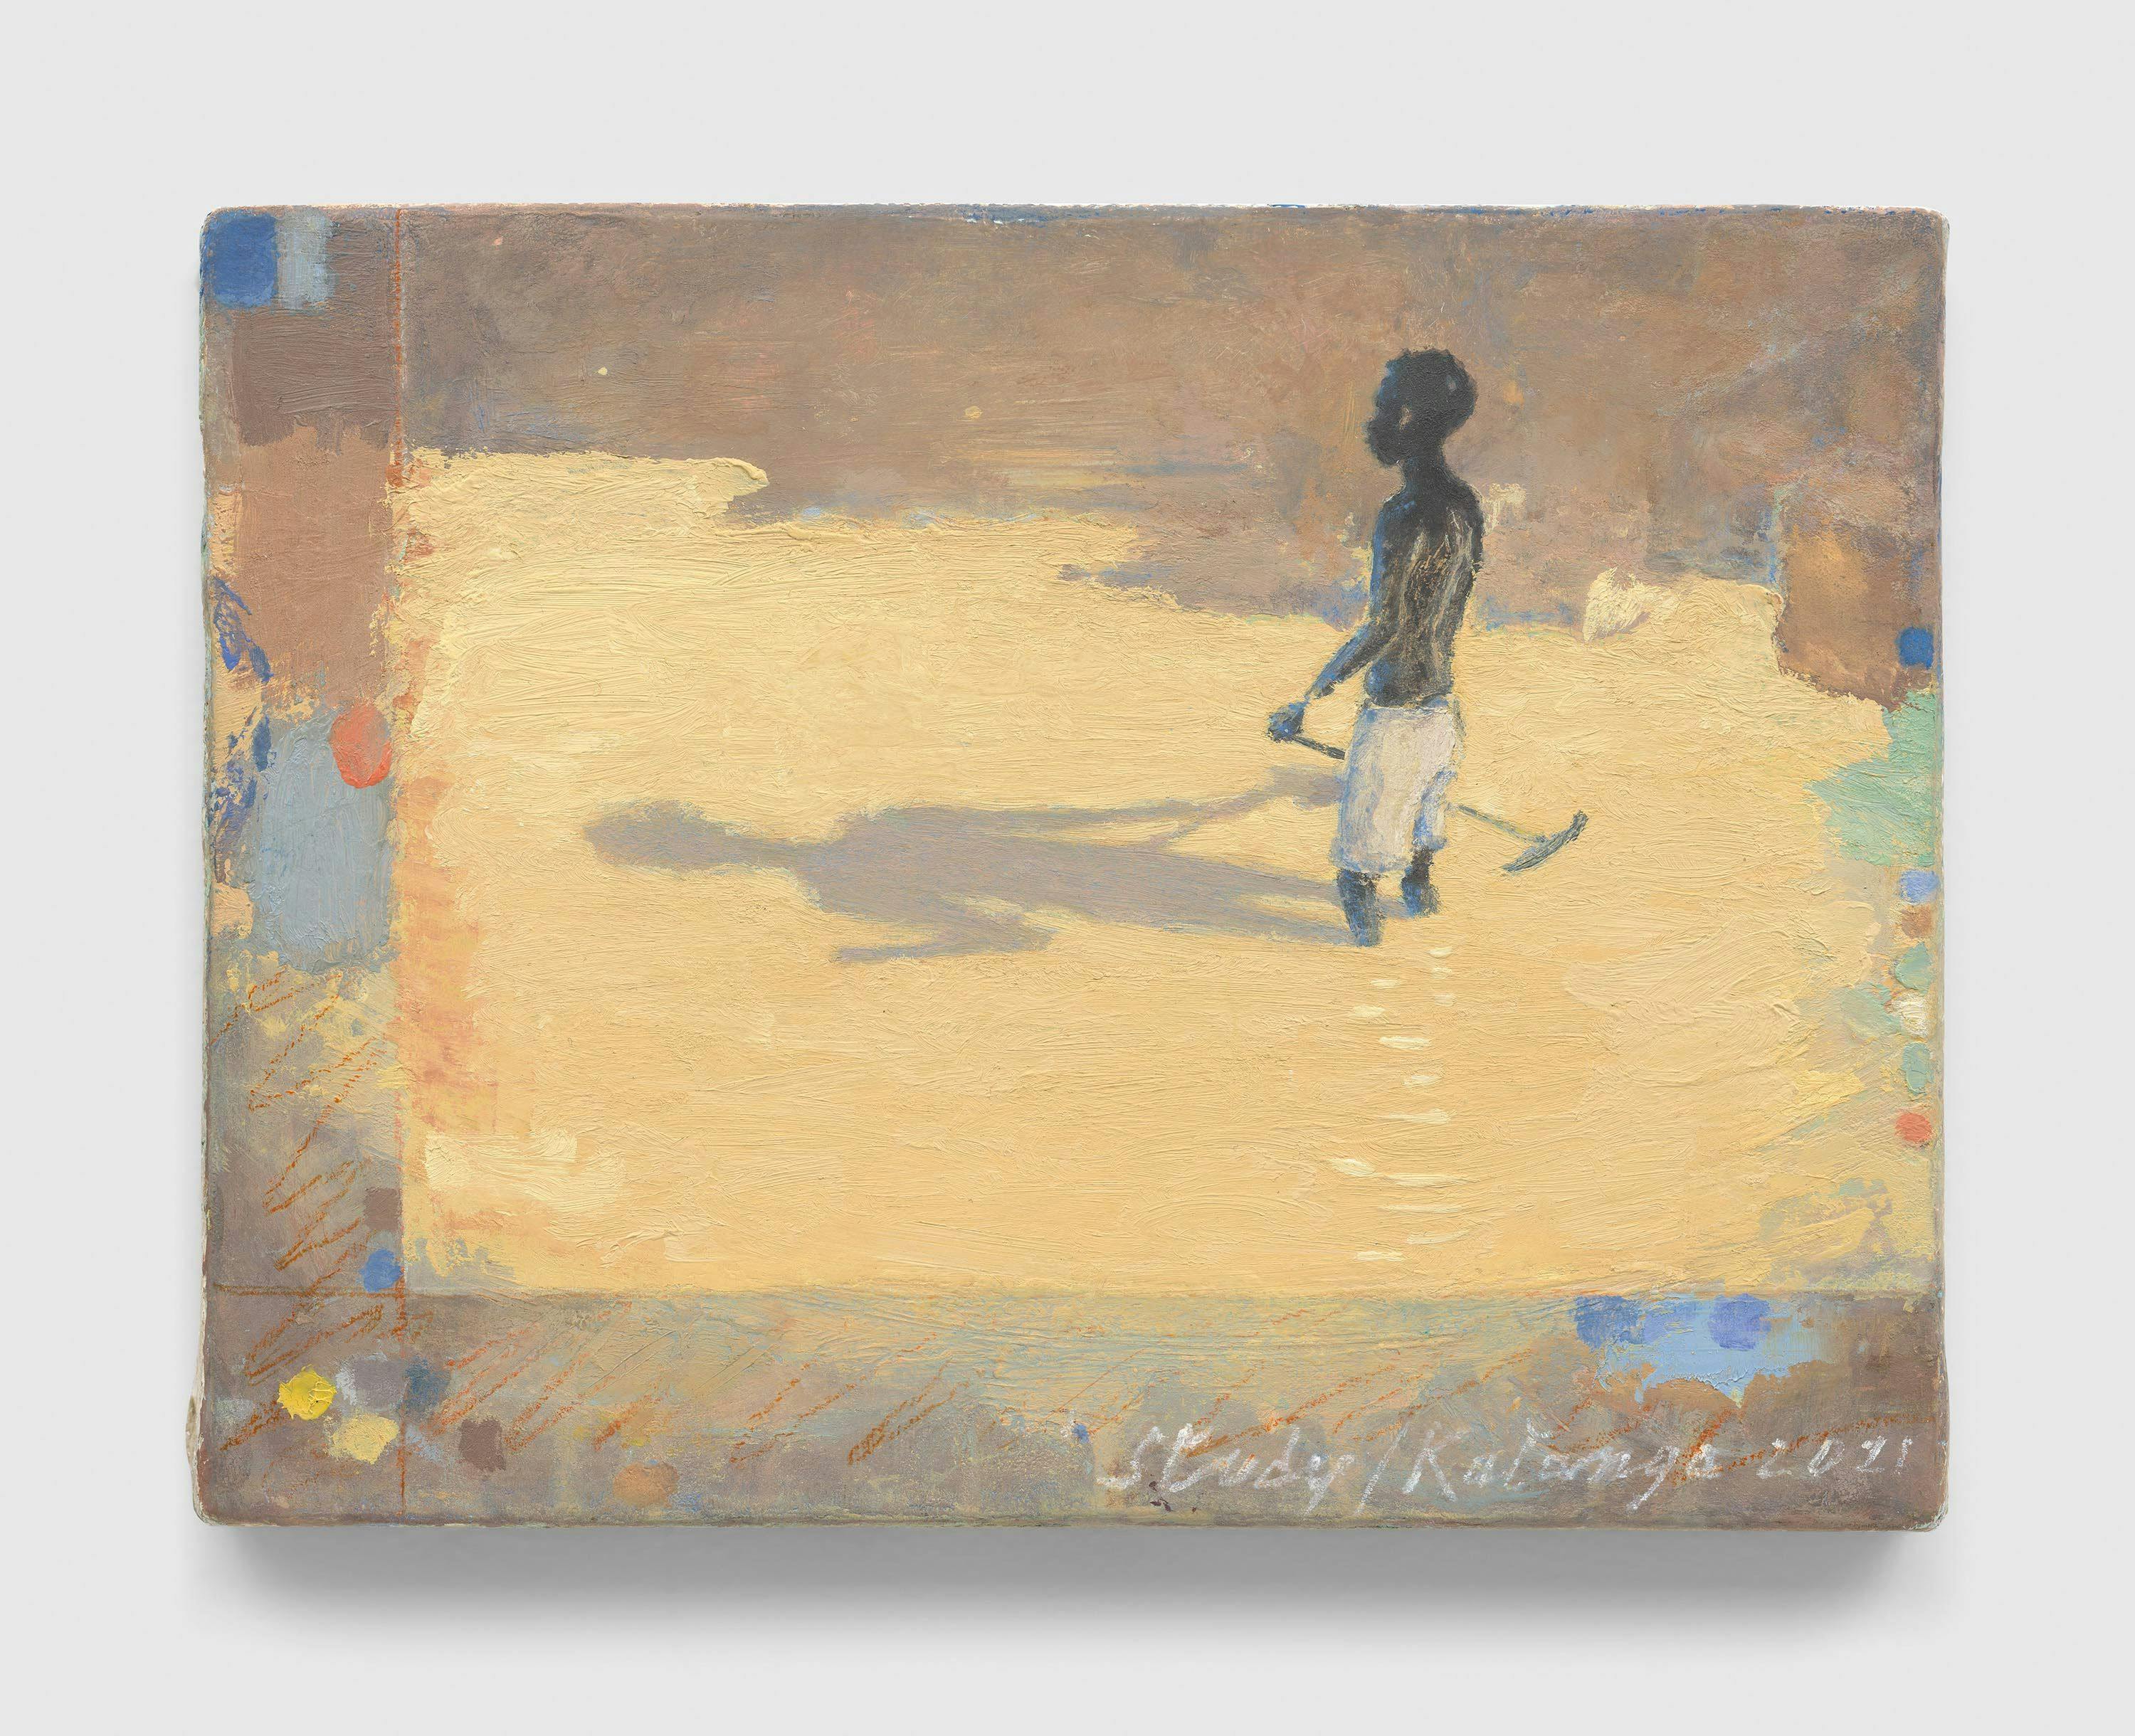 A painting by Francis Alÿs, titled Study for Katanga, April, dated 2021.